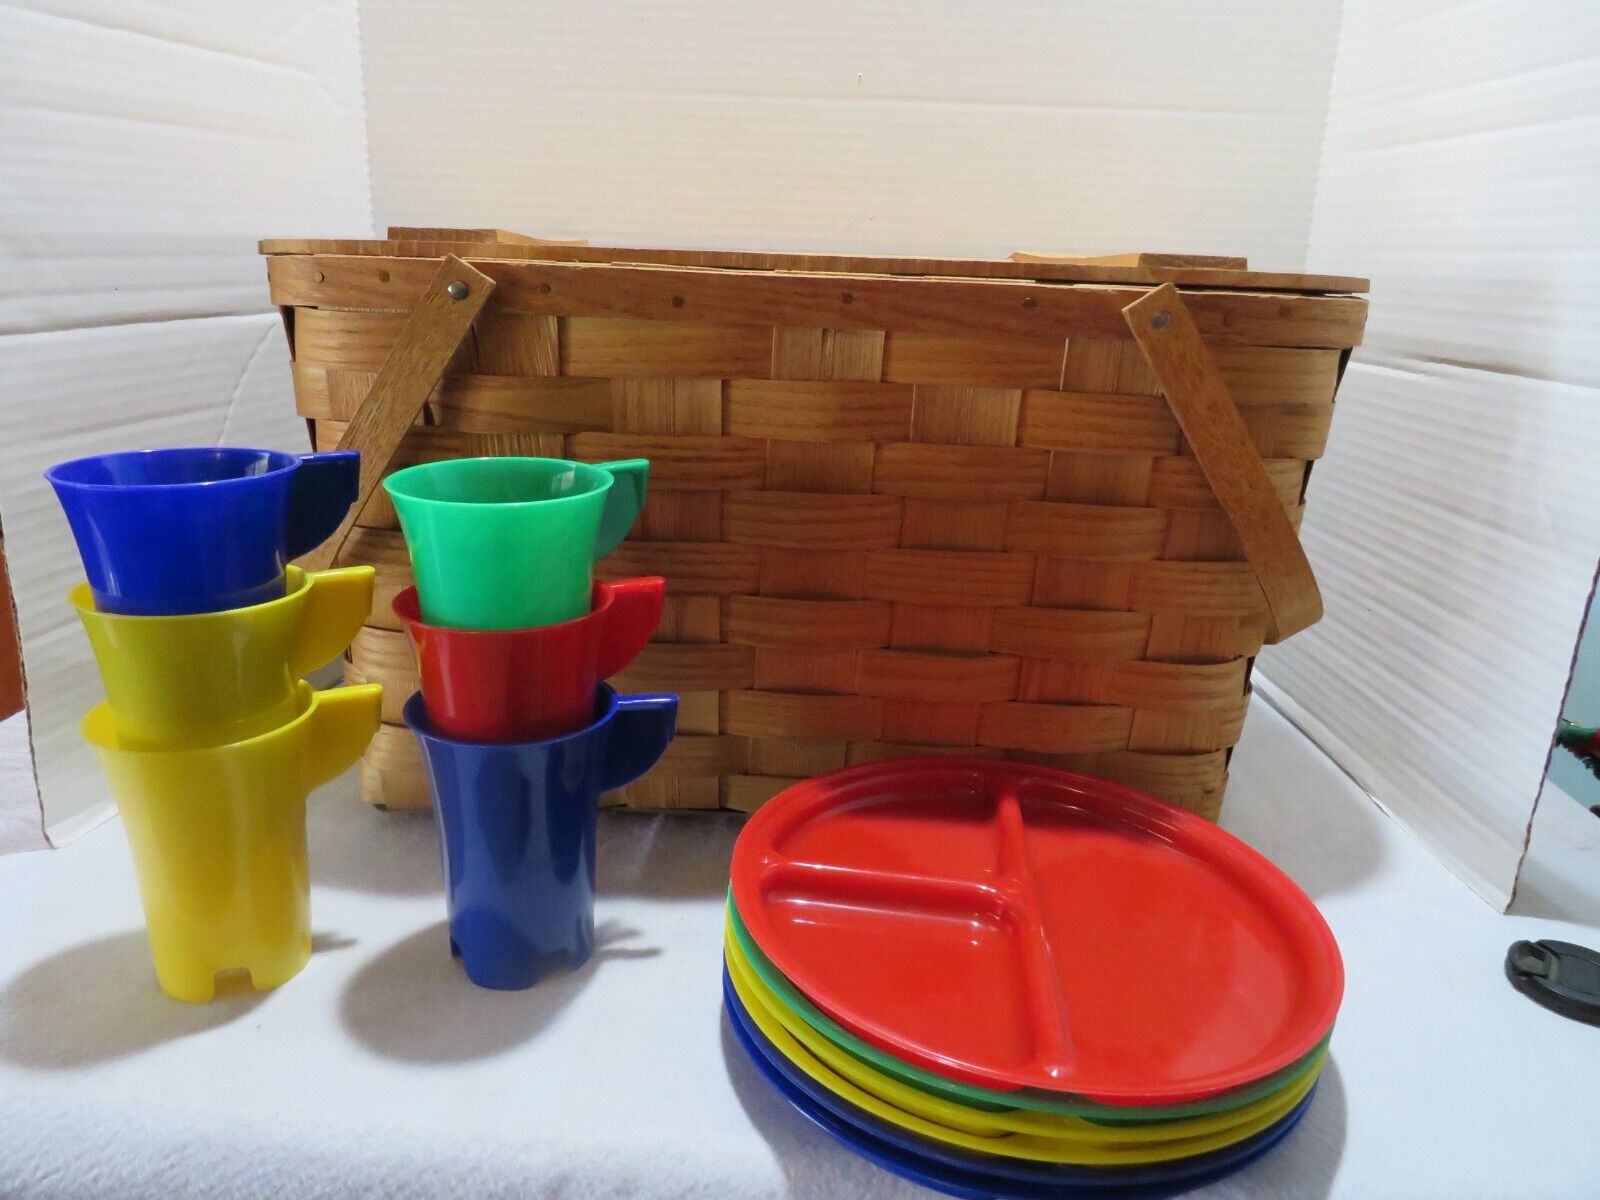 VTG 1950'S WOVEN WOOD PICNIC BASKET W/CUPS & PLATES BY JERYWIL